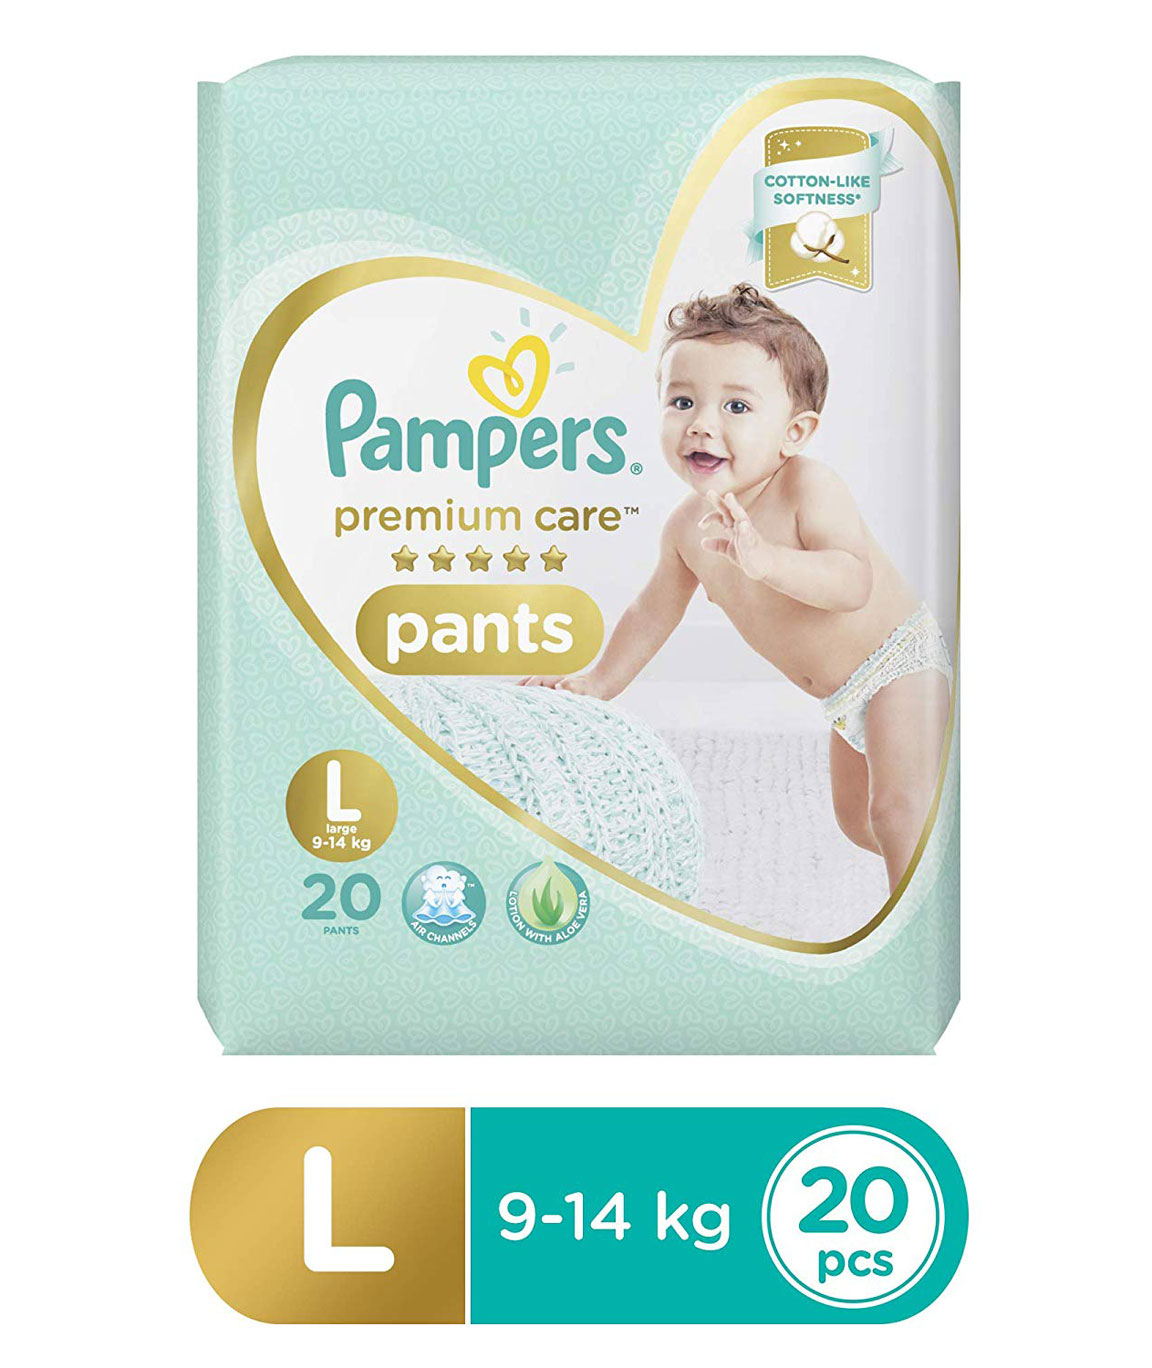 Pampers Premium Care Pants Diapers, Large, 20 Count